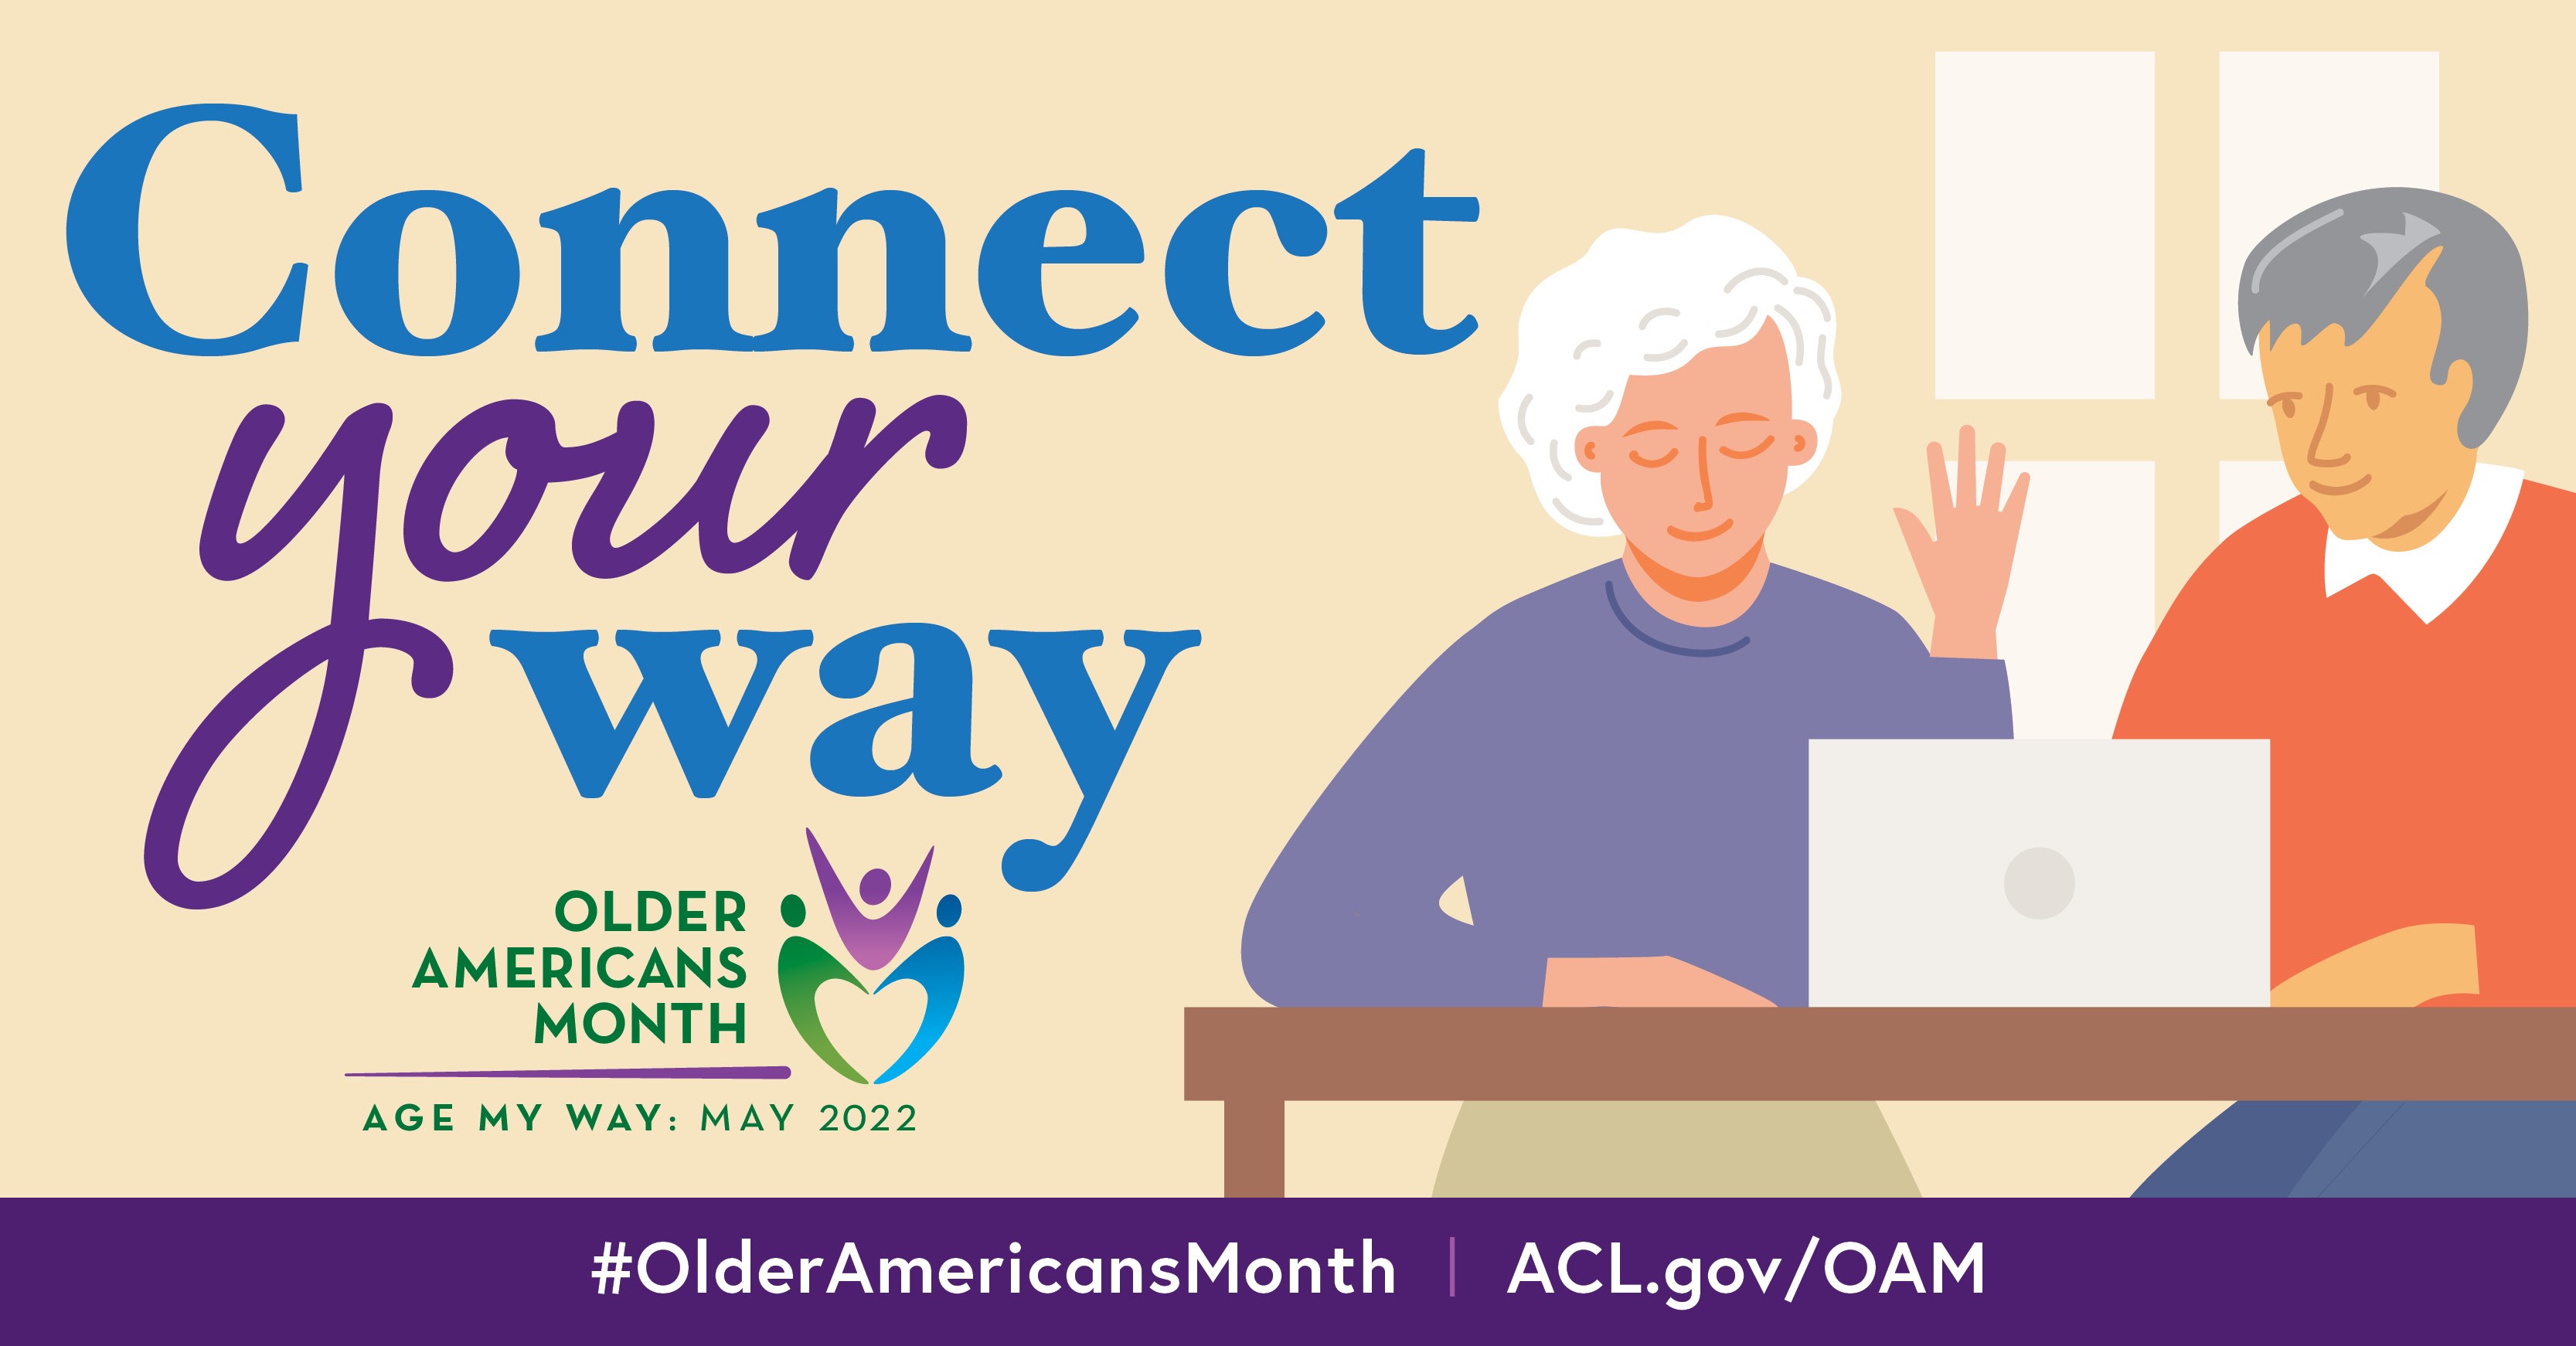 Connect Your Way. Older Americans Month, Age My Way: May 2022. #OlderAmericansMonth ACL.gov/OAM